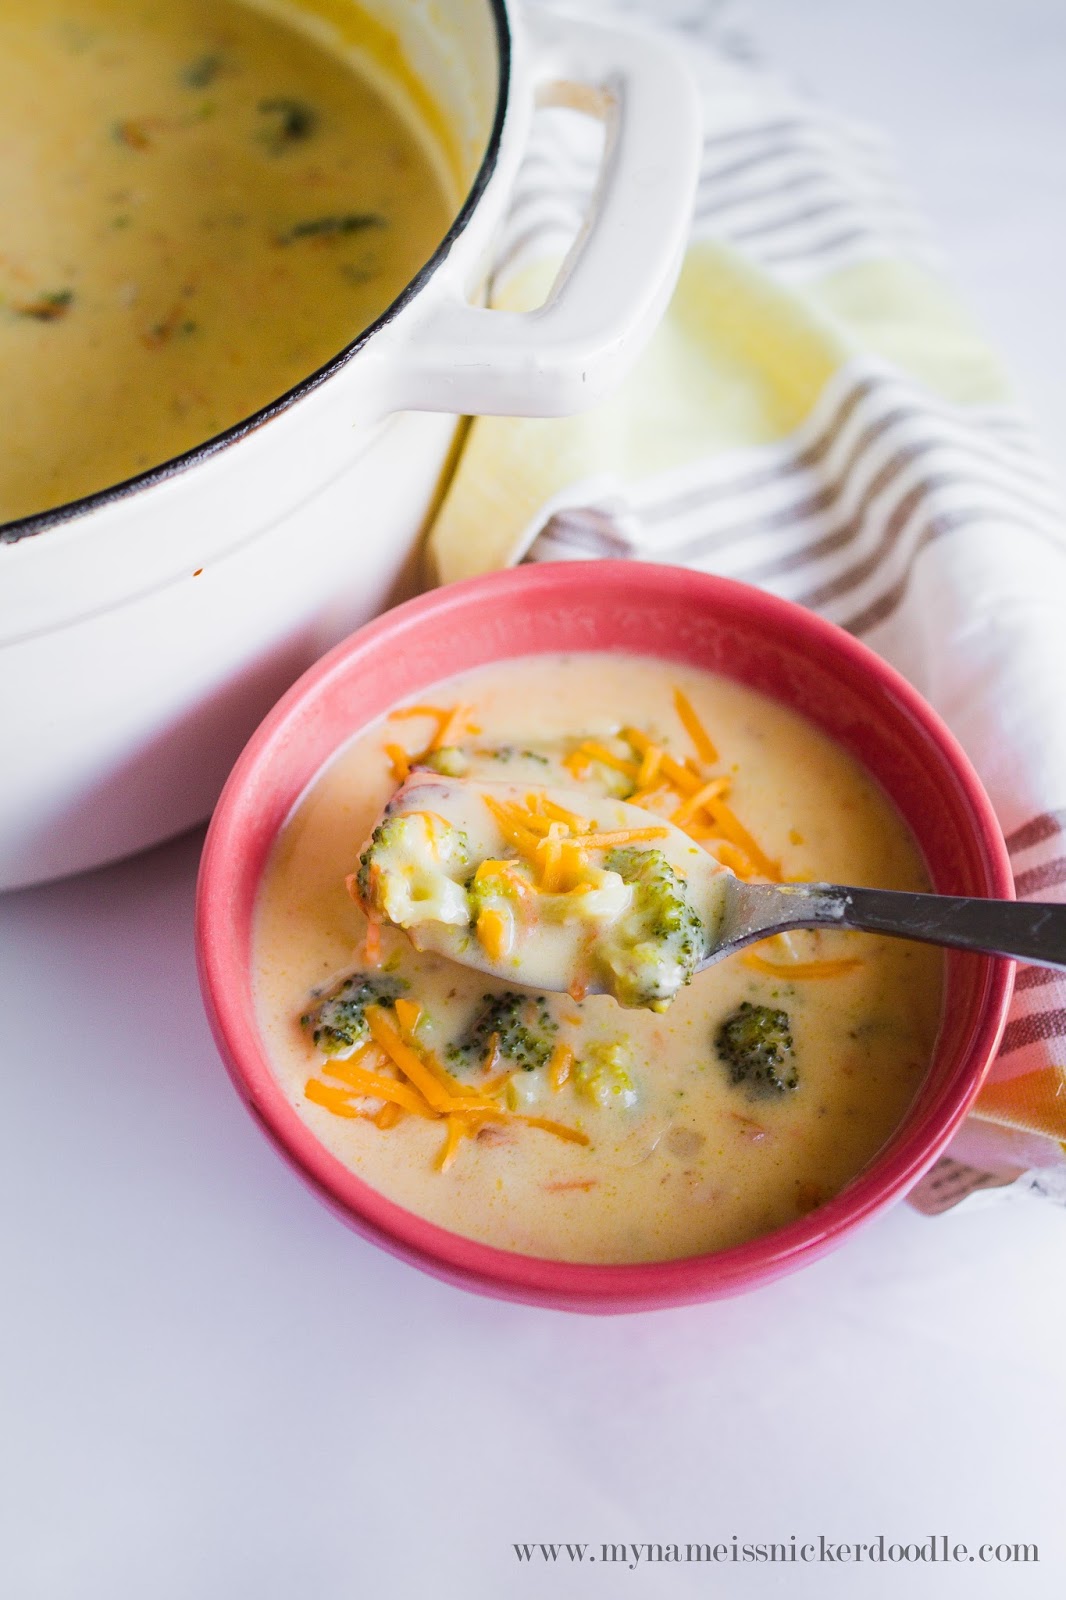 Cheesy Bacon and Broccoli Soup Recipe - My Name Is Snickerdoodle